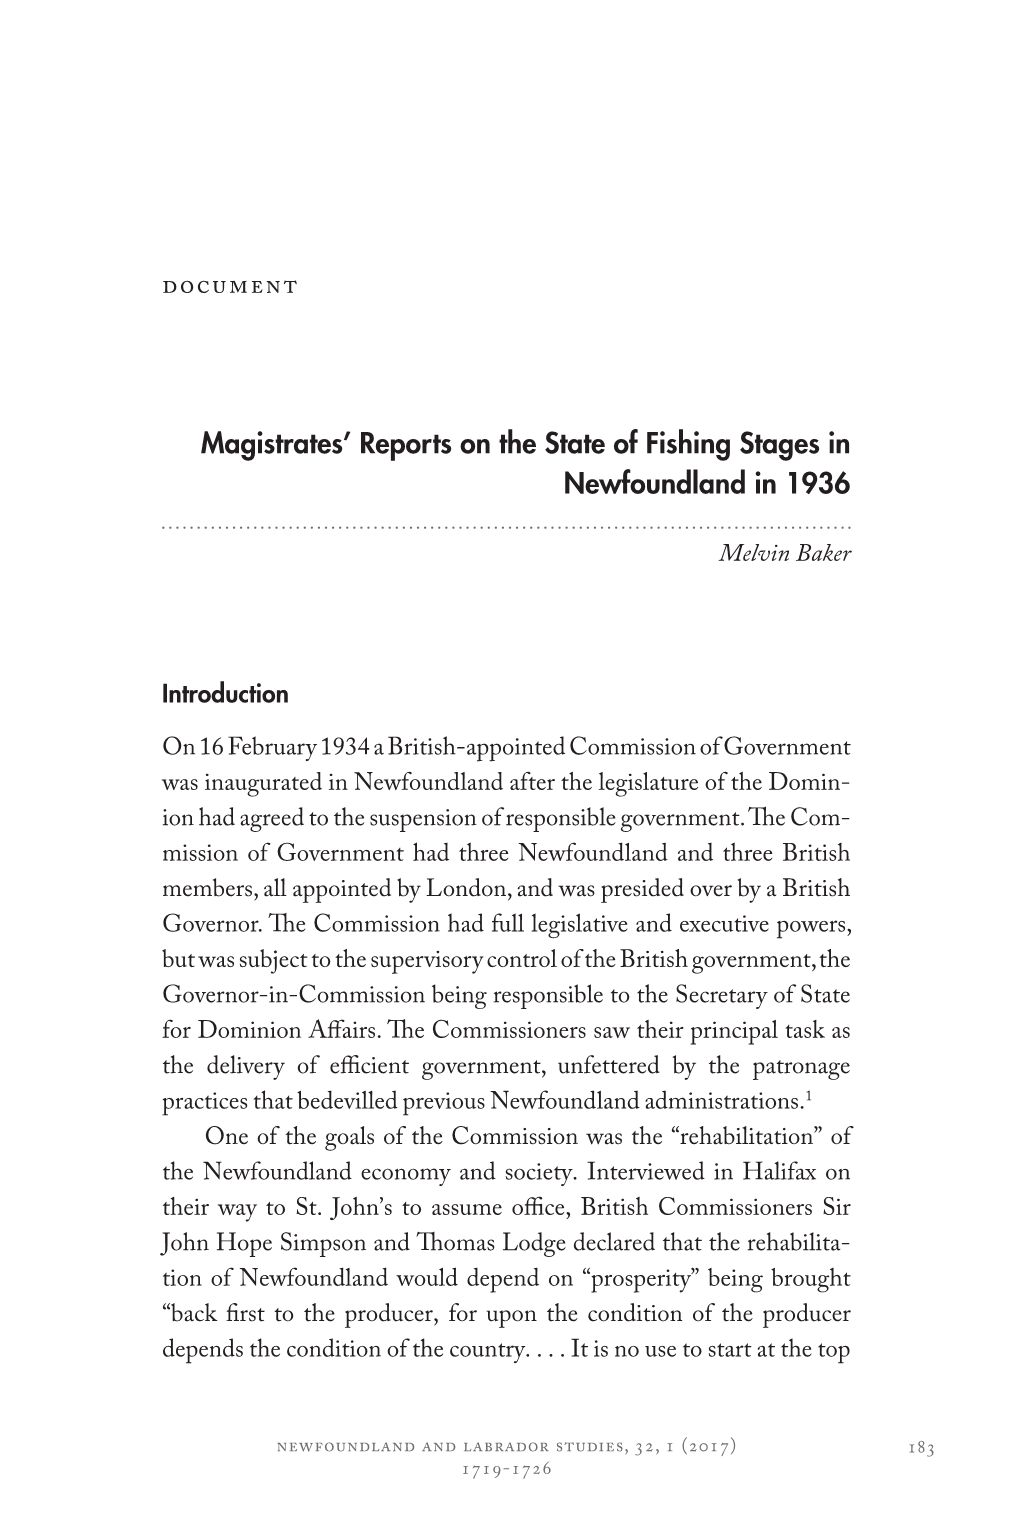 Magistrates' Reports on the State of Fishing Stages in Newfoundland In